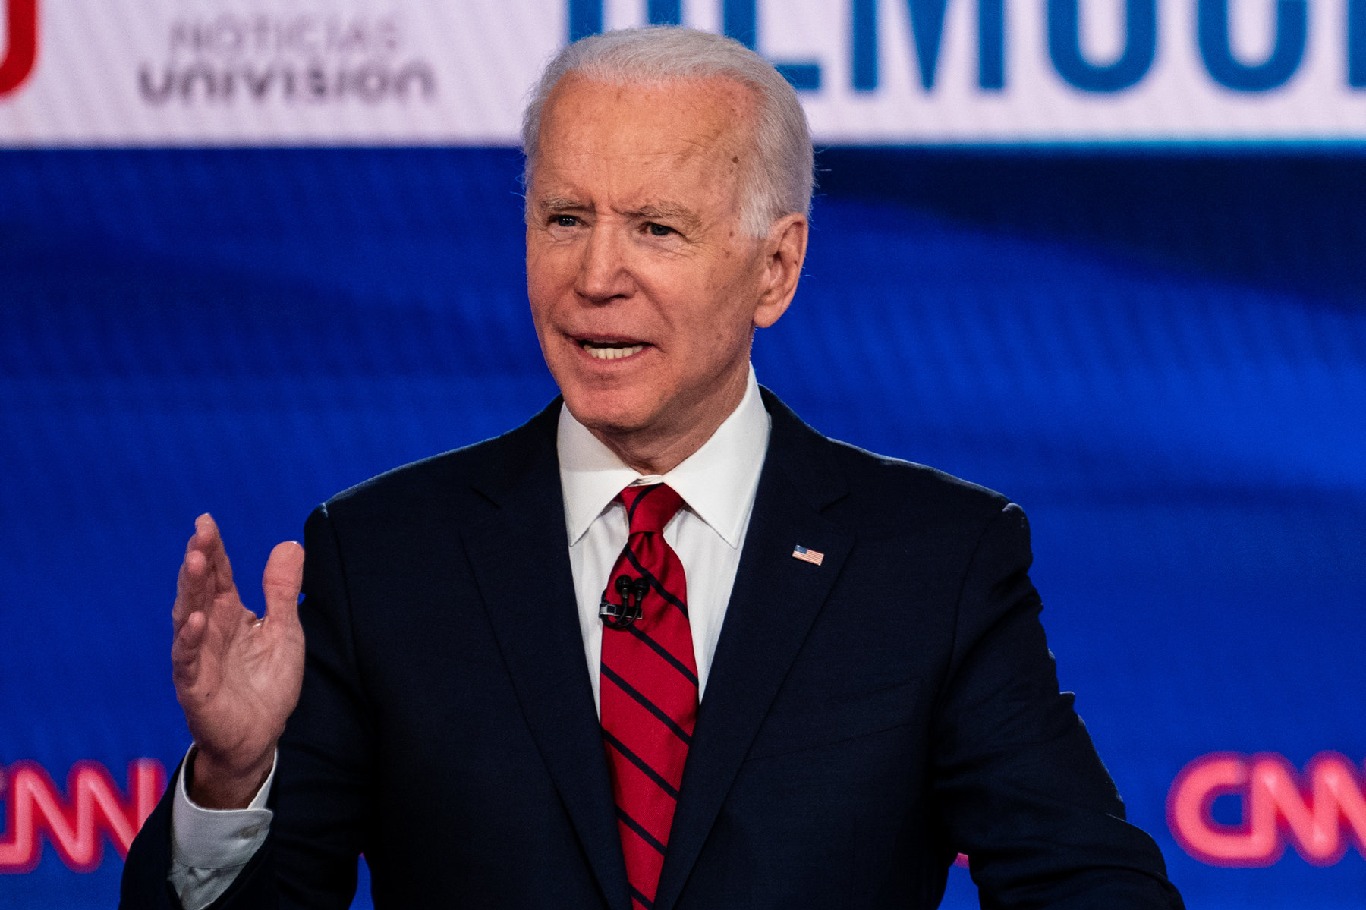 Joe Biden promises that he will give citizenship for 1 crore people if he wins